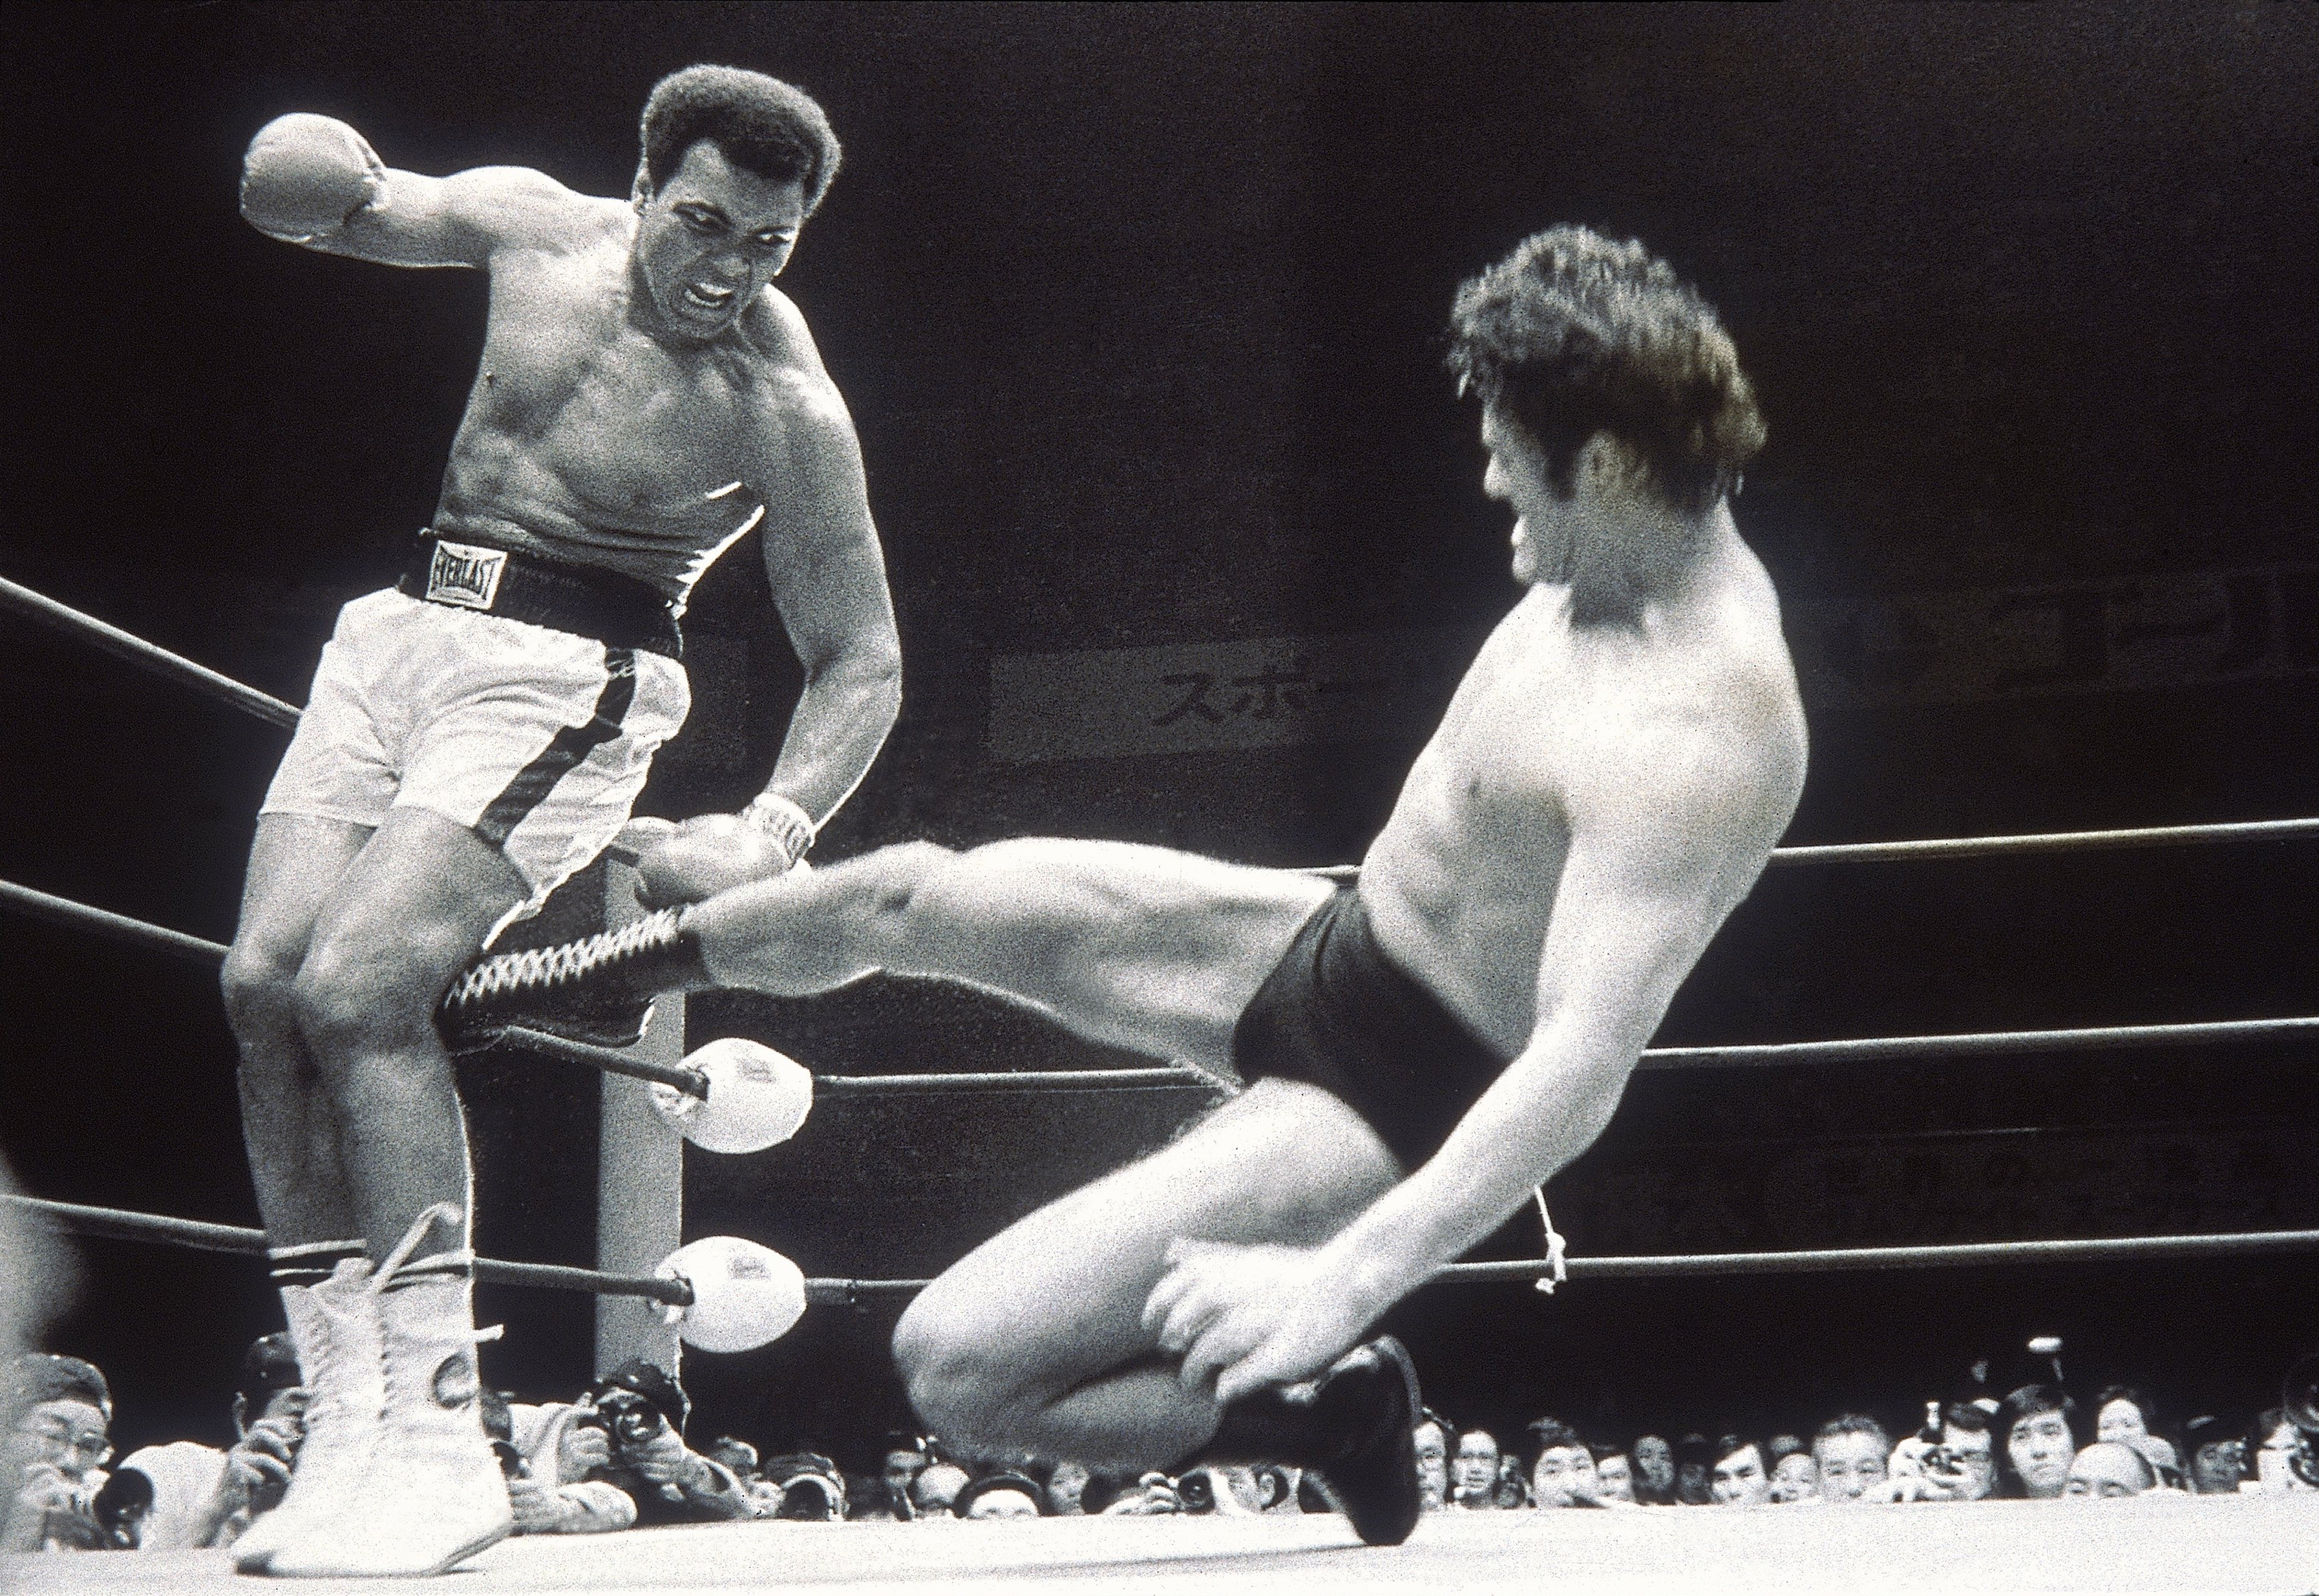  Ali fends off a kick from wrestler Antonio Inoki during an exhibition fight in Tokyo, Japan, 1976